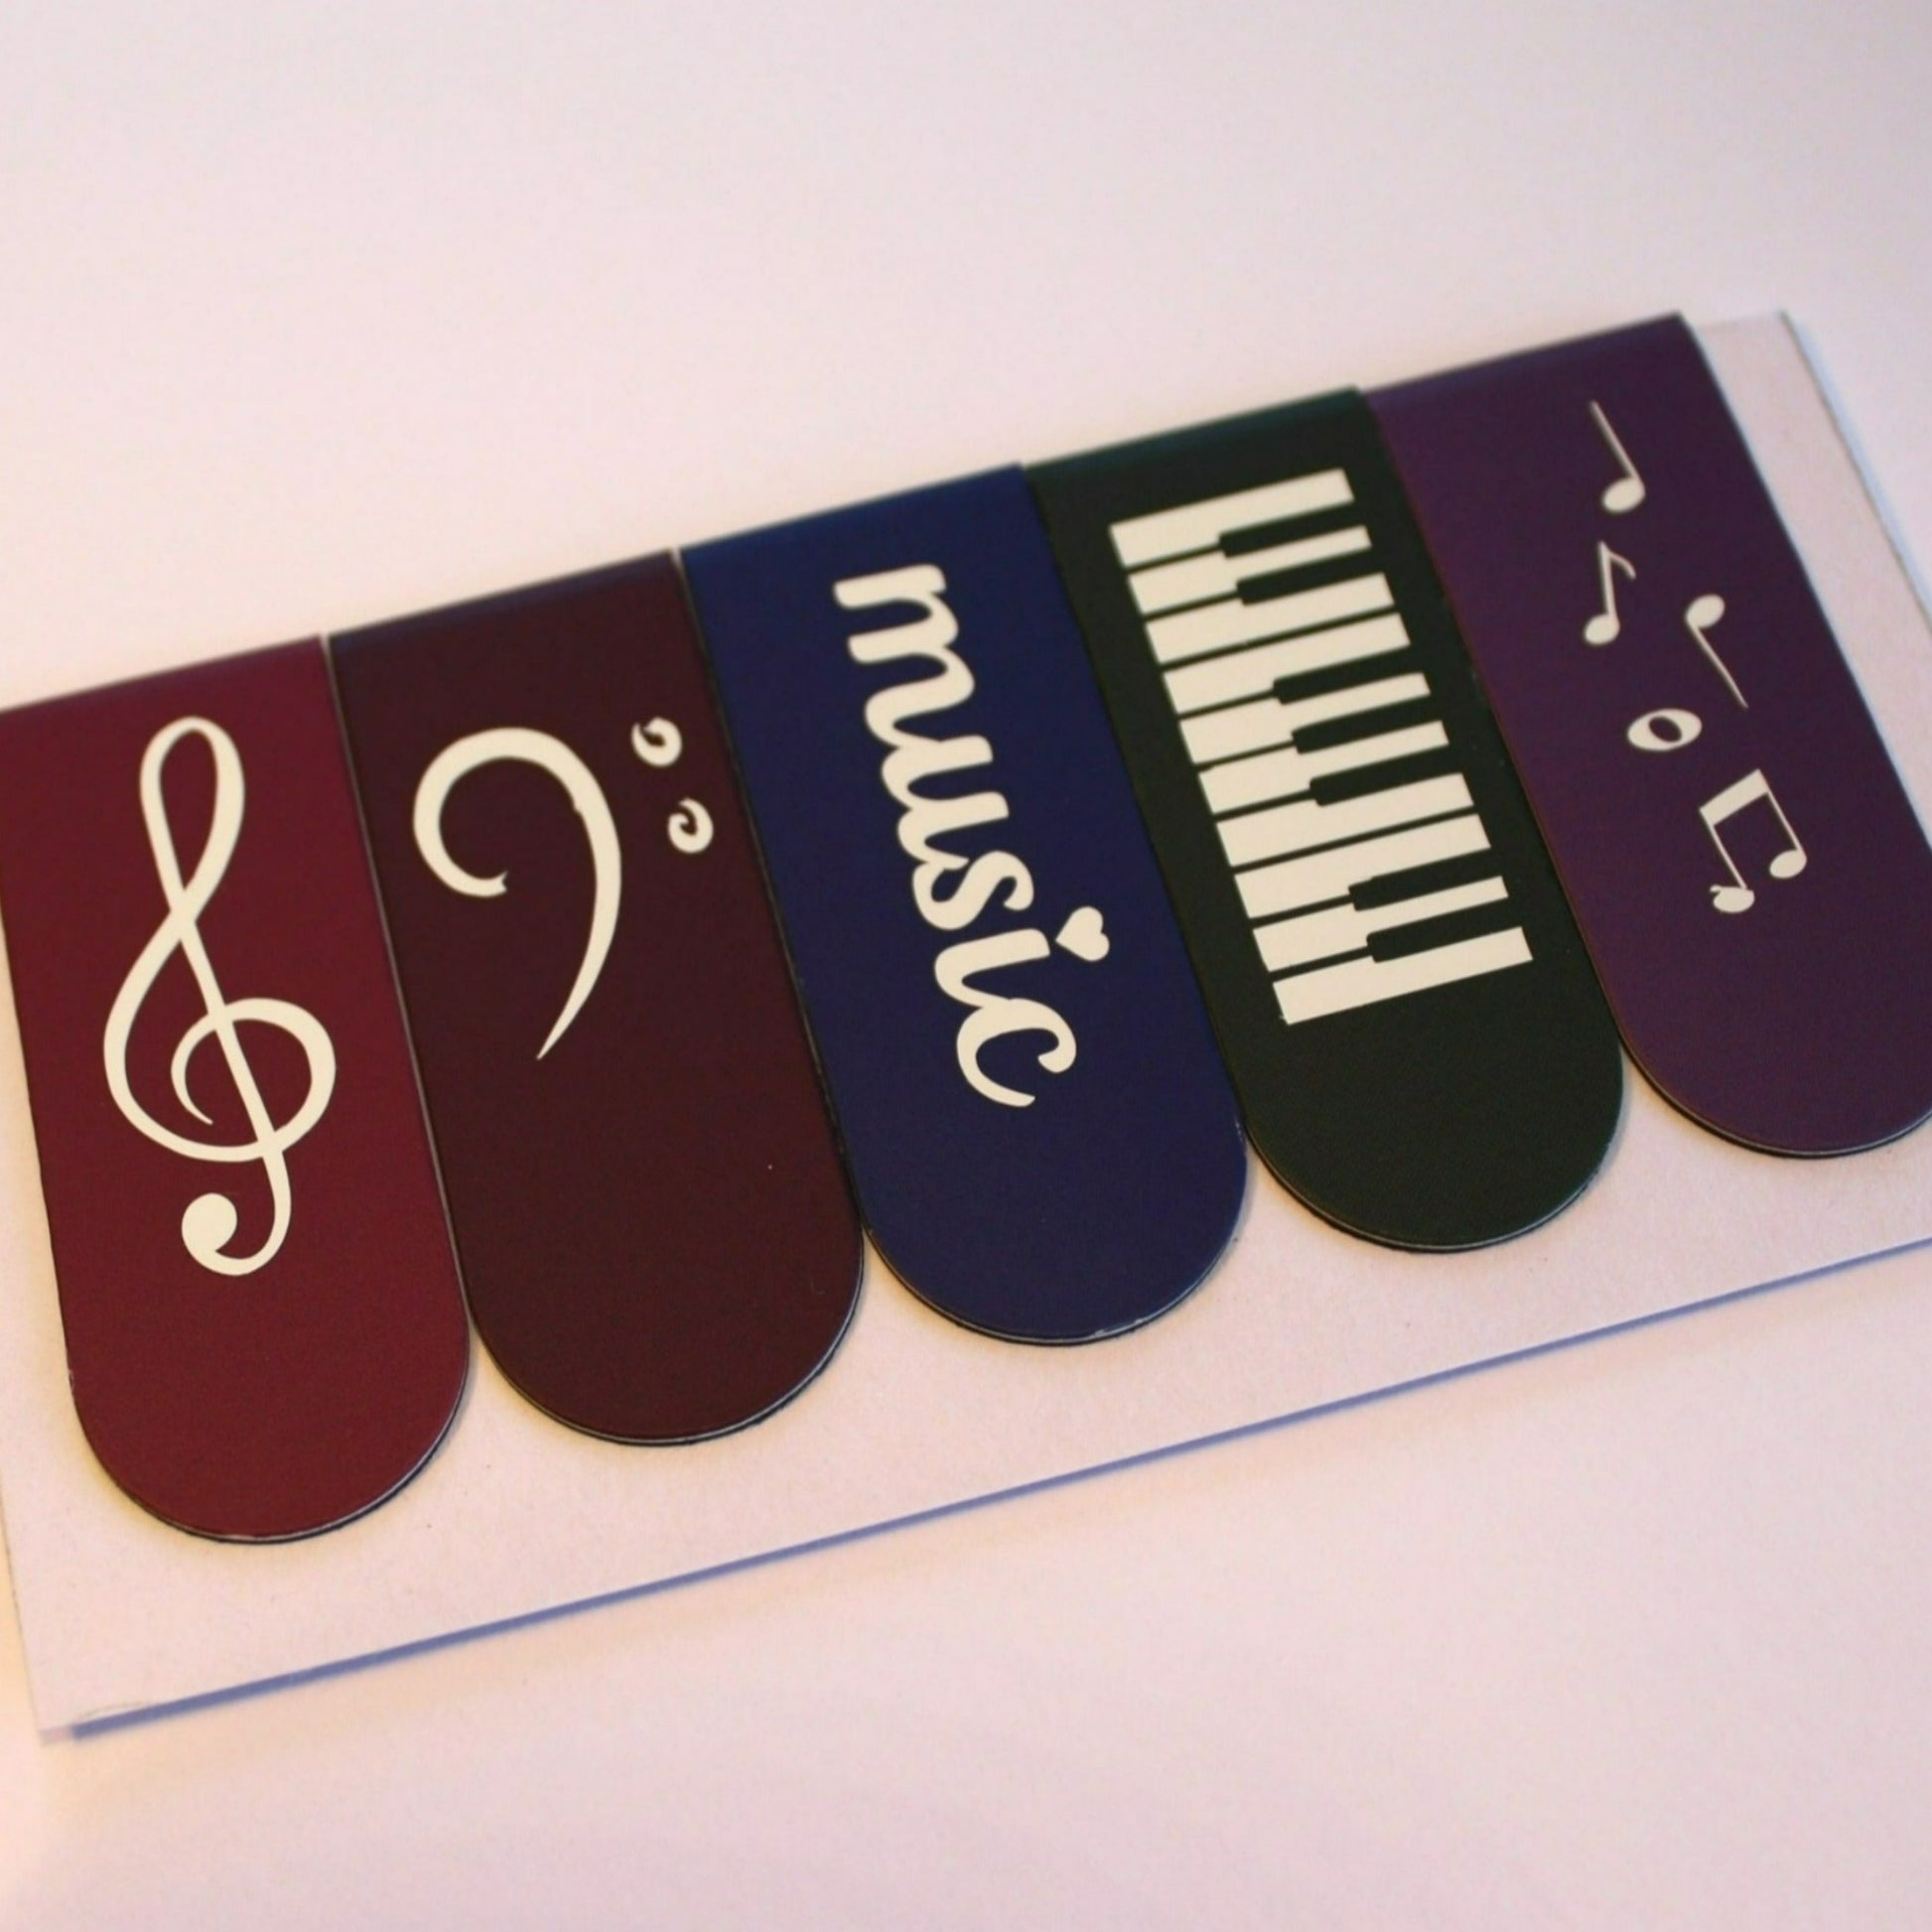 Bookmarks in plum, dark plum, violet, dark grey and purple. Each bookmark has a different symbol; treble clef, piano keys, bass clef, 'music' and music notes.